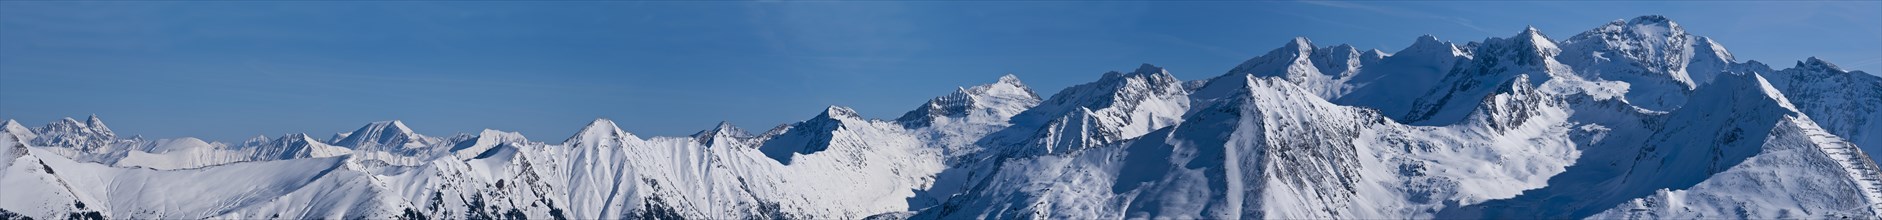 Panoramic view of the Hohe Tauern or High Tauern mountain range